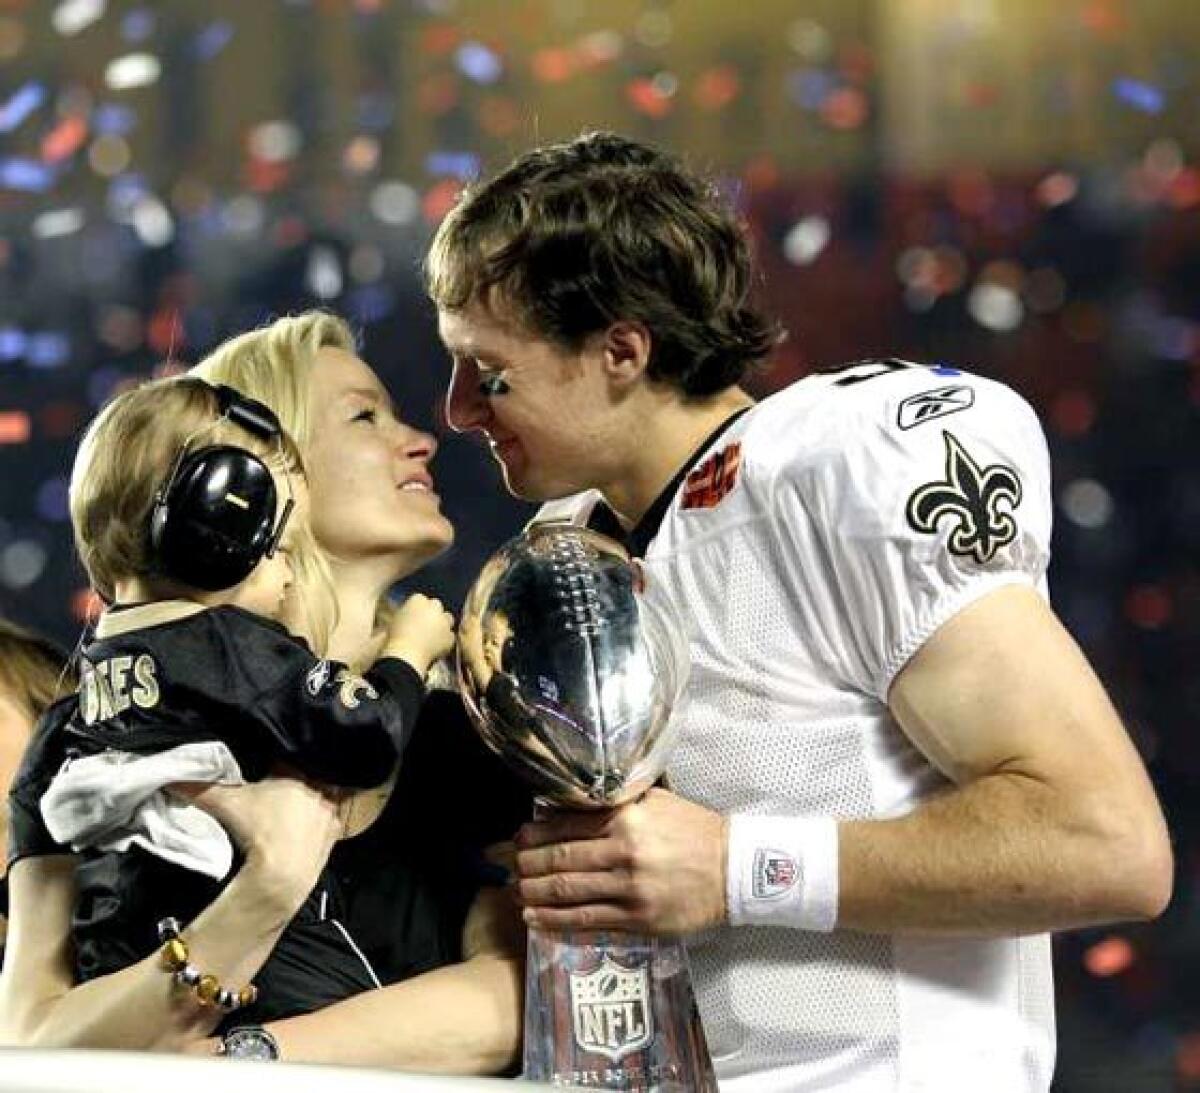 Drew and Brittany Brees celebrate the New Orleans Saints' Super Bowl victory over the Indianapolis Colts on Feb. 7, 2010.